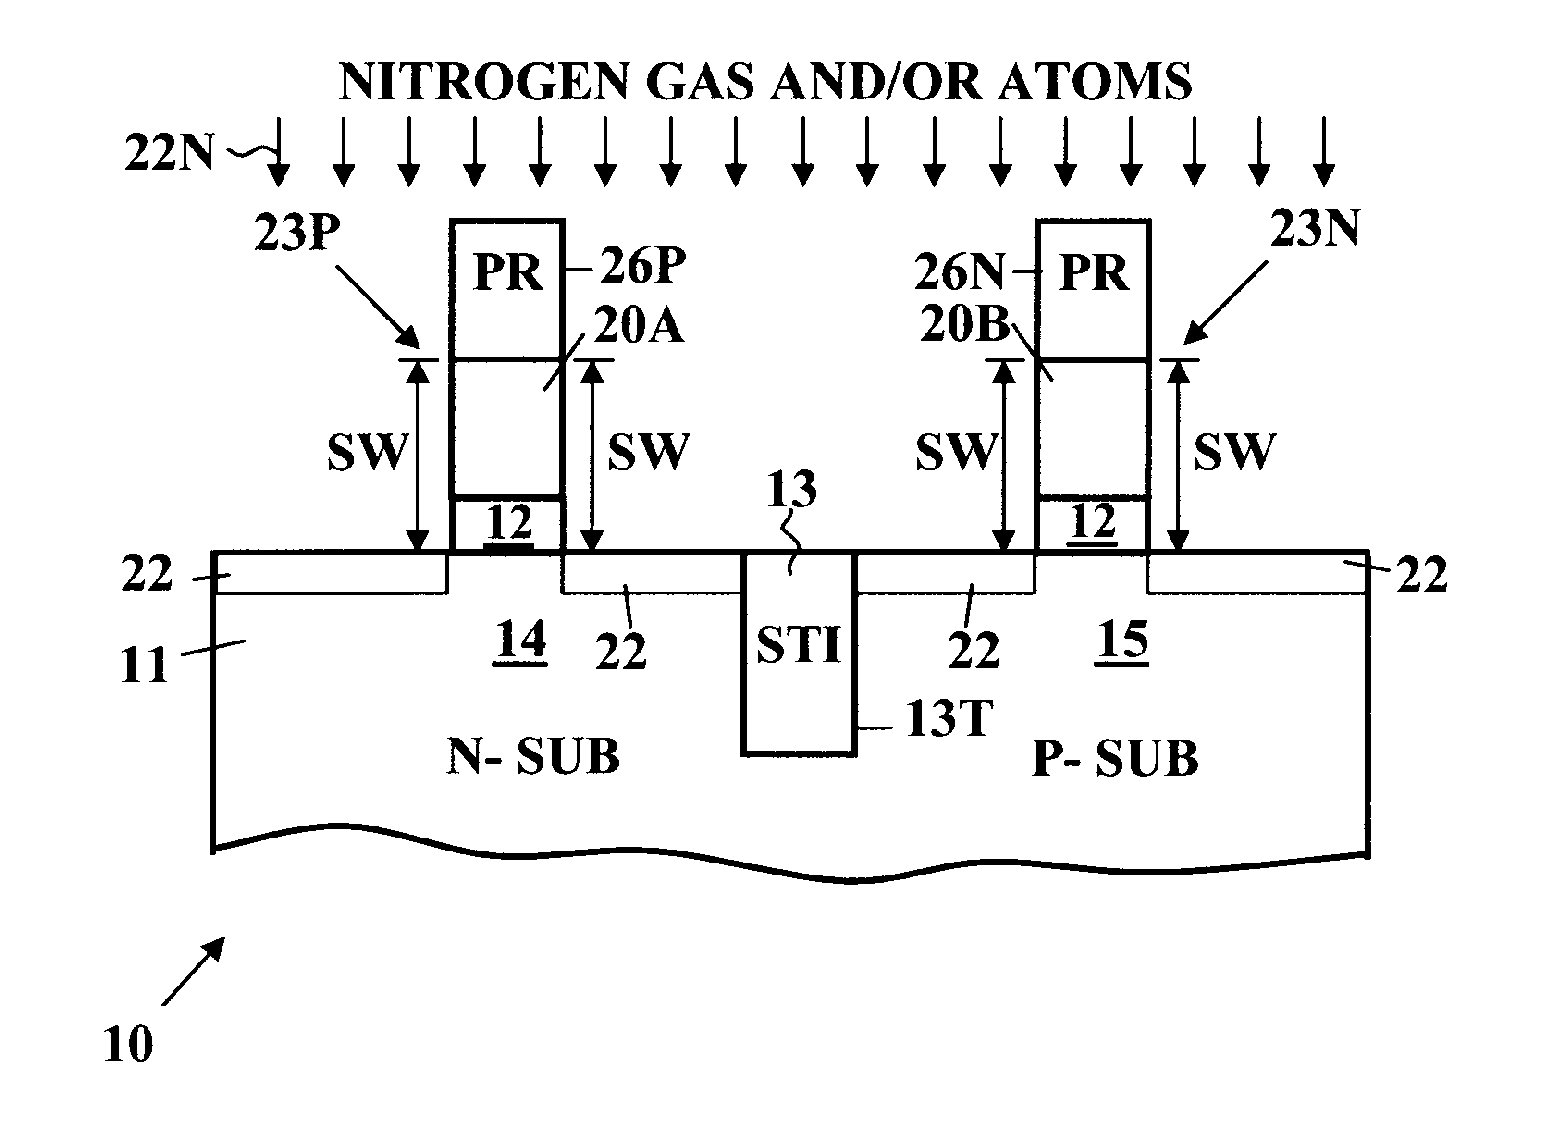 Ion implantation of nitrogen into semiconductor substrate prior to oxidation for offset spacer formation